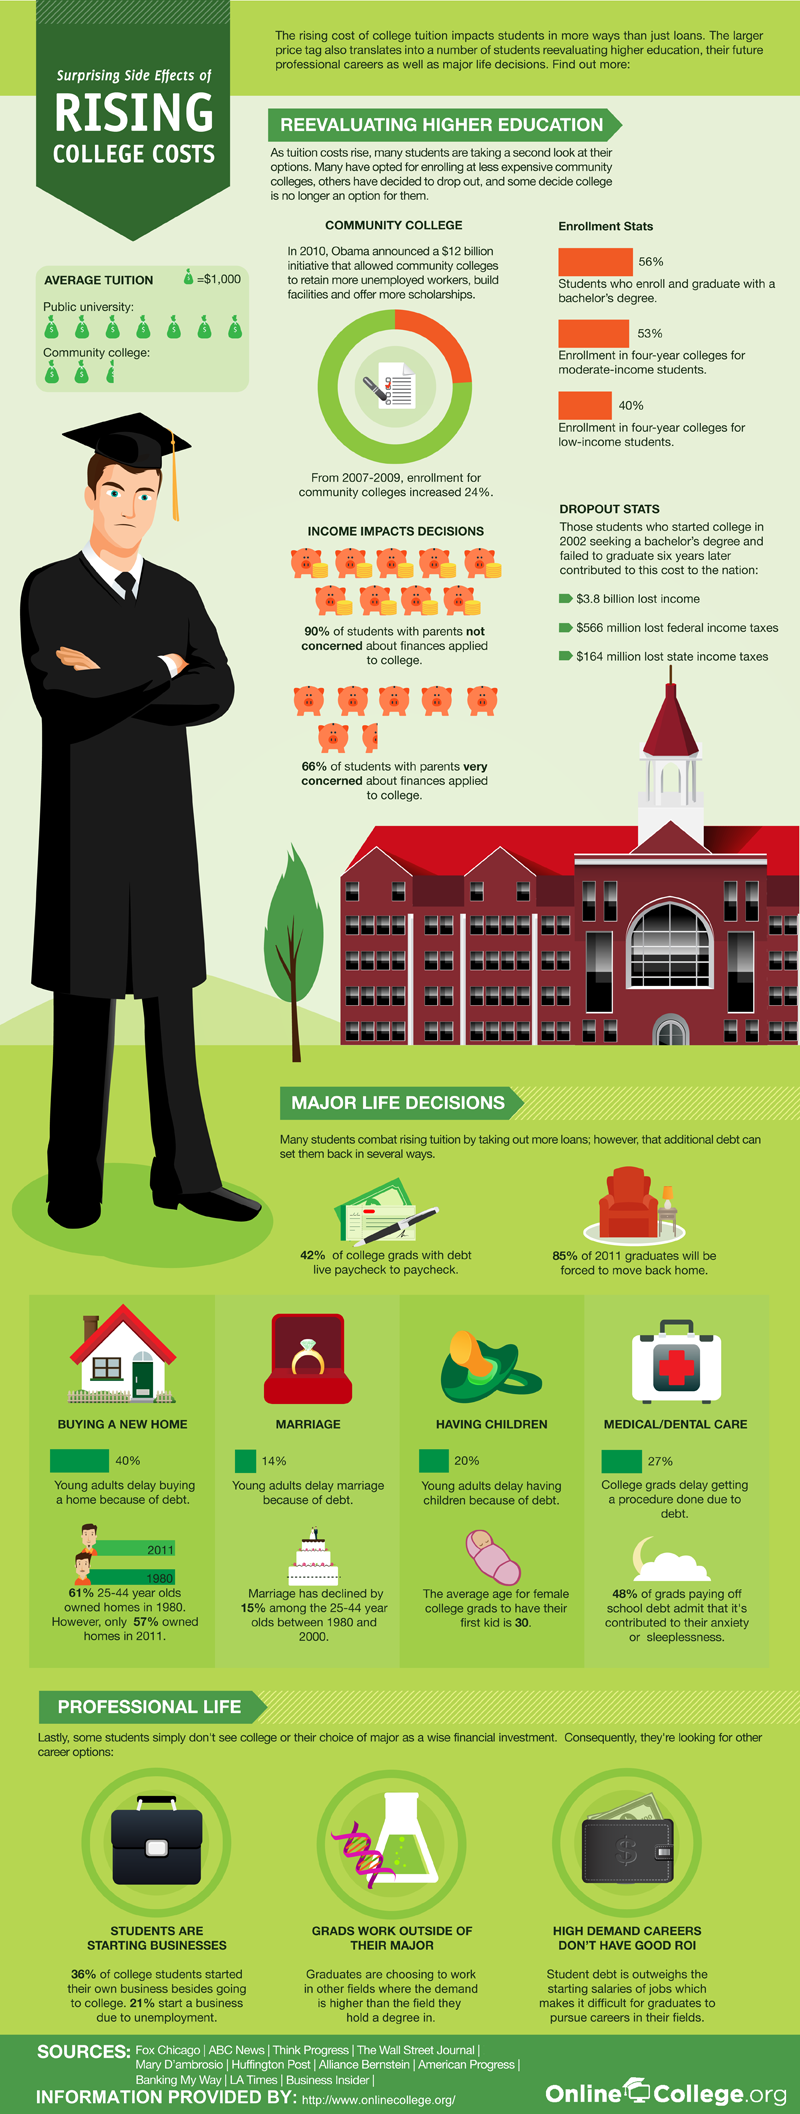 Rising college cost infographic